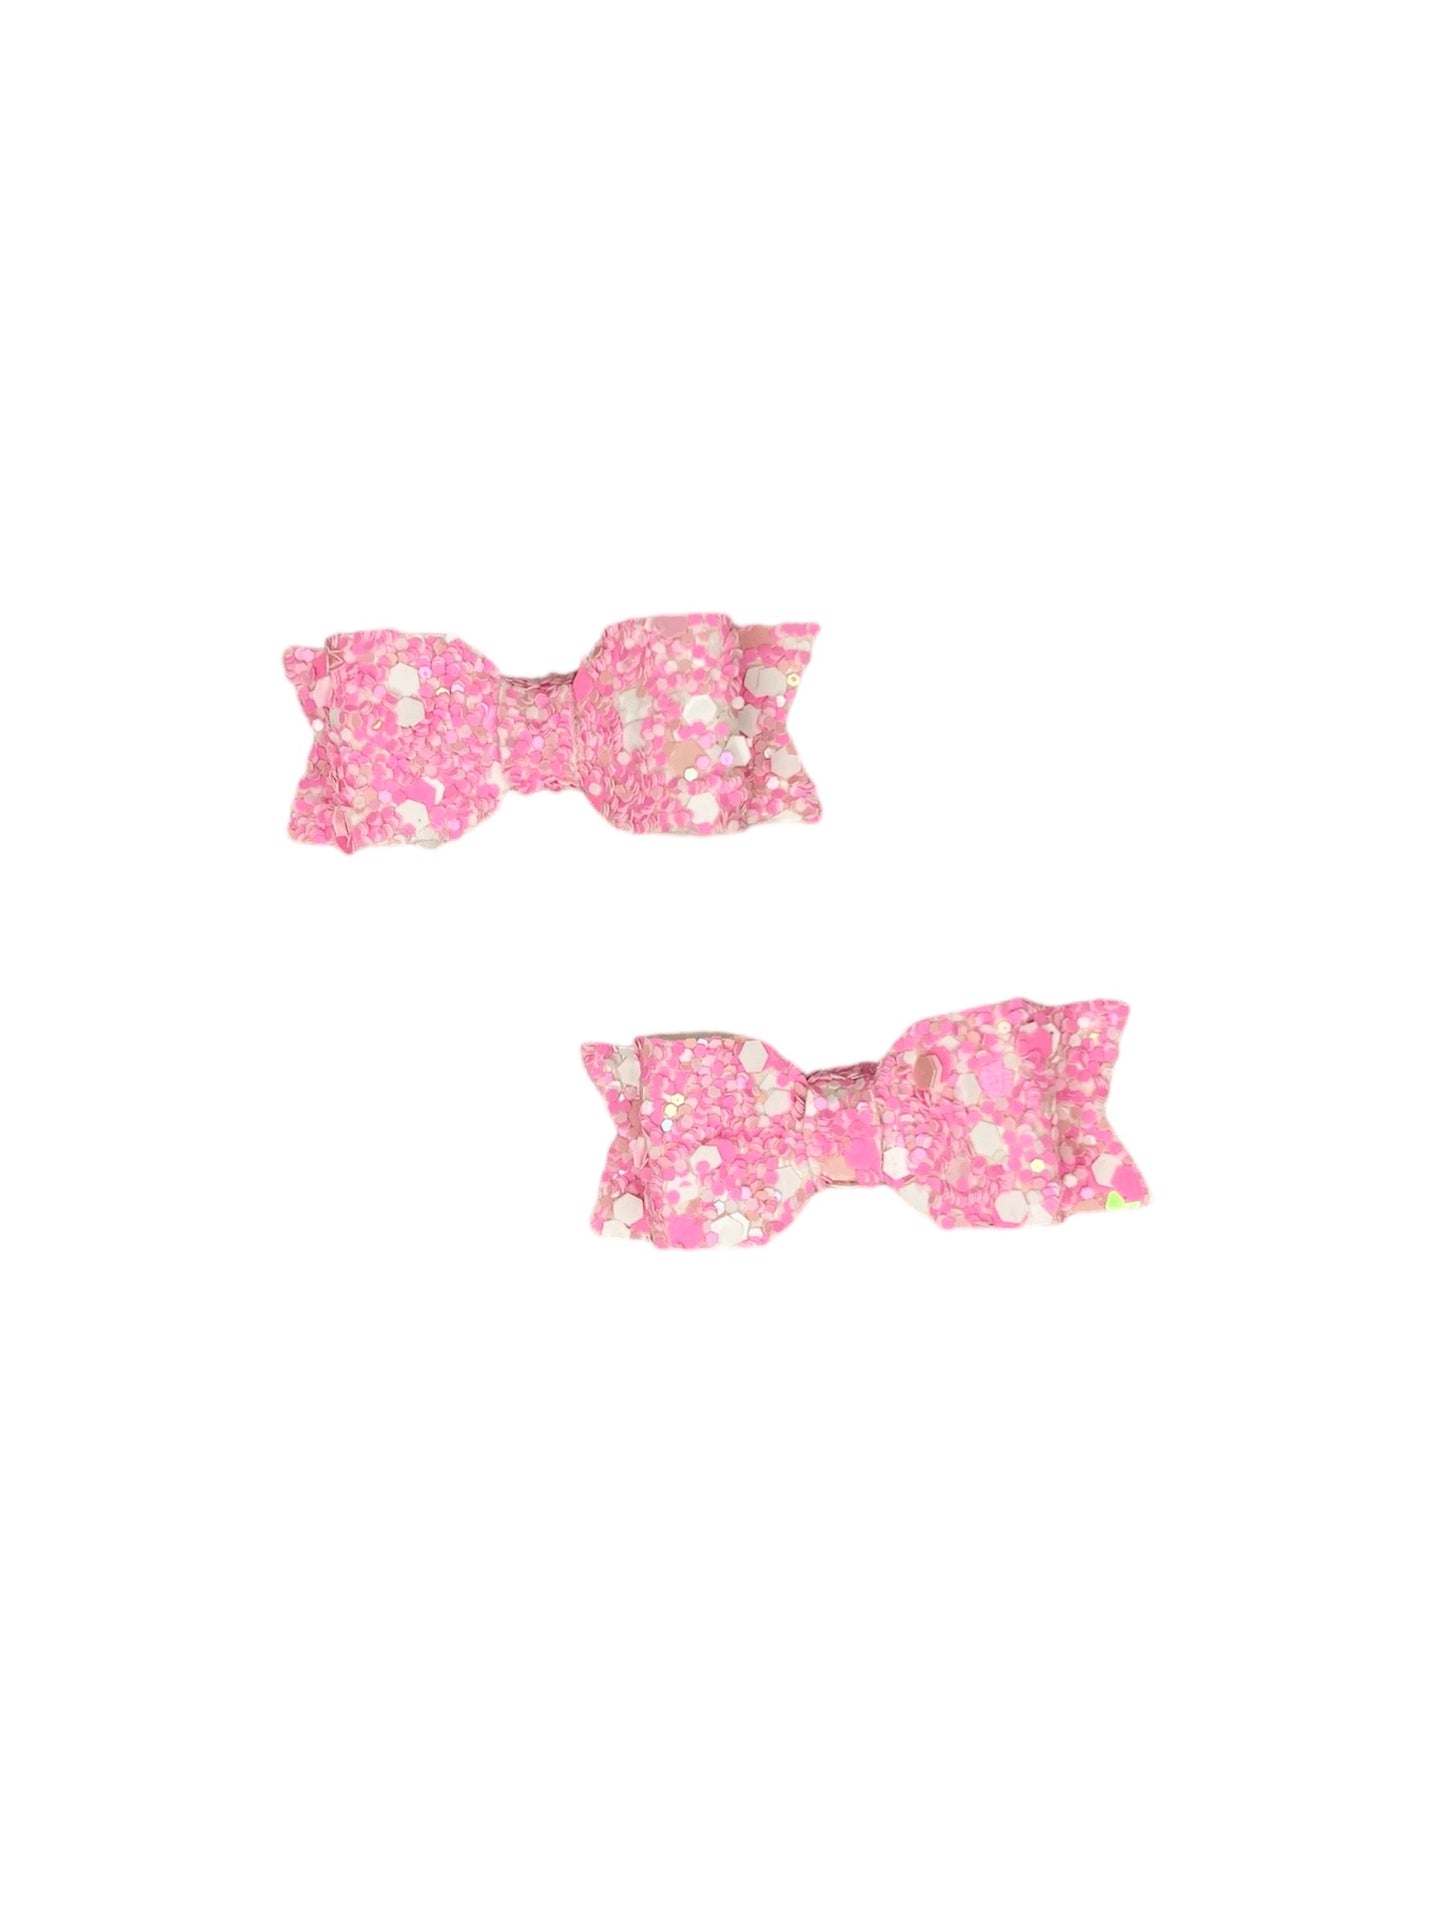 Pink and White Glitter Micro Pigtail Bows!